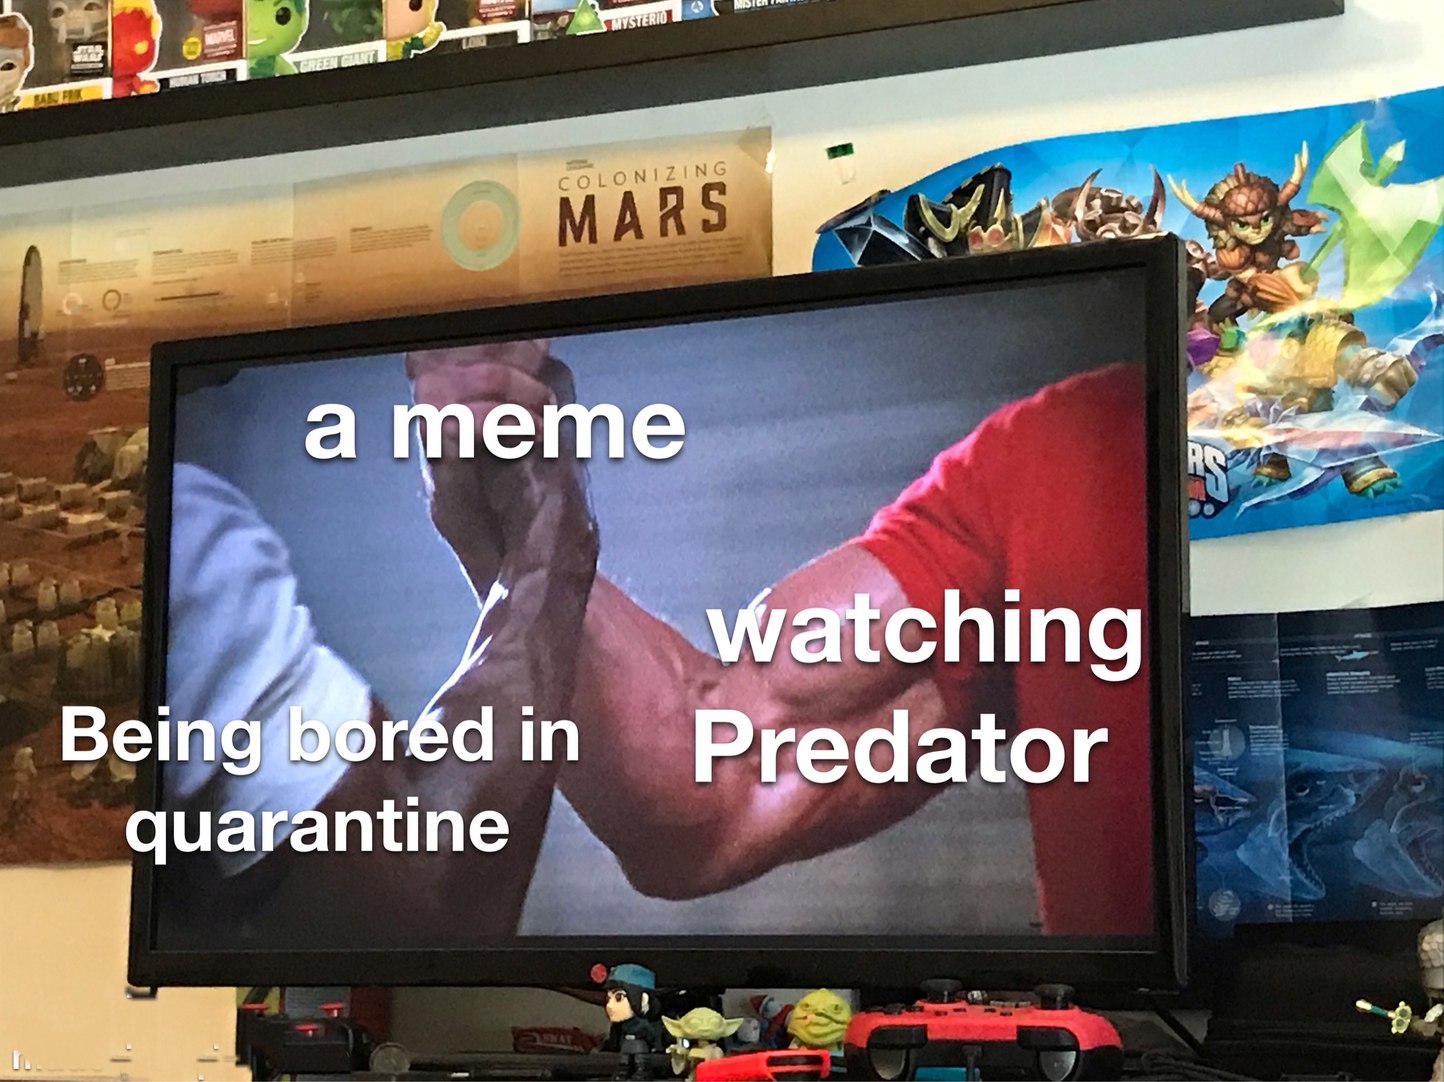 i was bored in quarantine and i watched predator for the meme